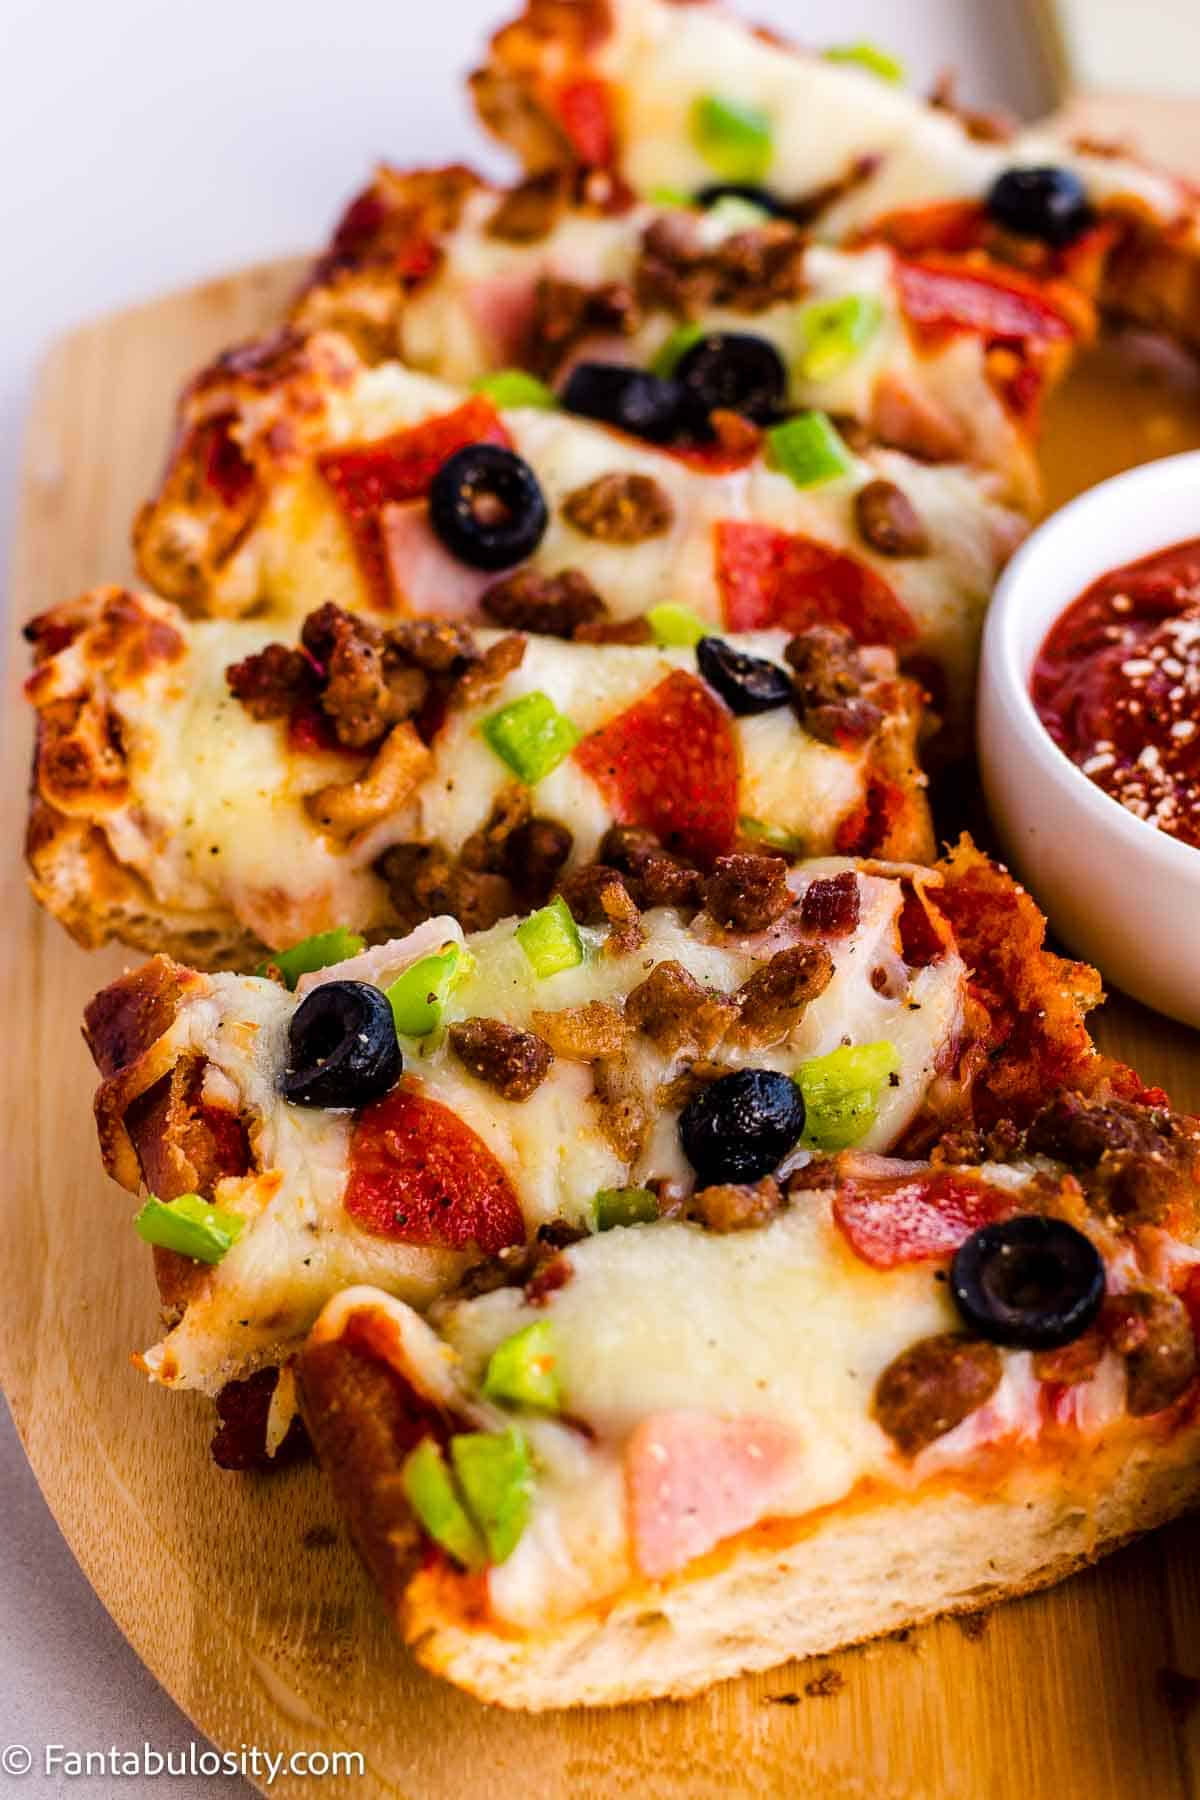 Sliced French bread pizza slices on wooden cutting board with meat and vegetable toppings.